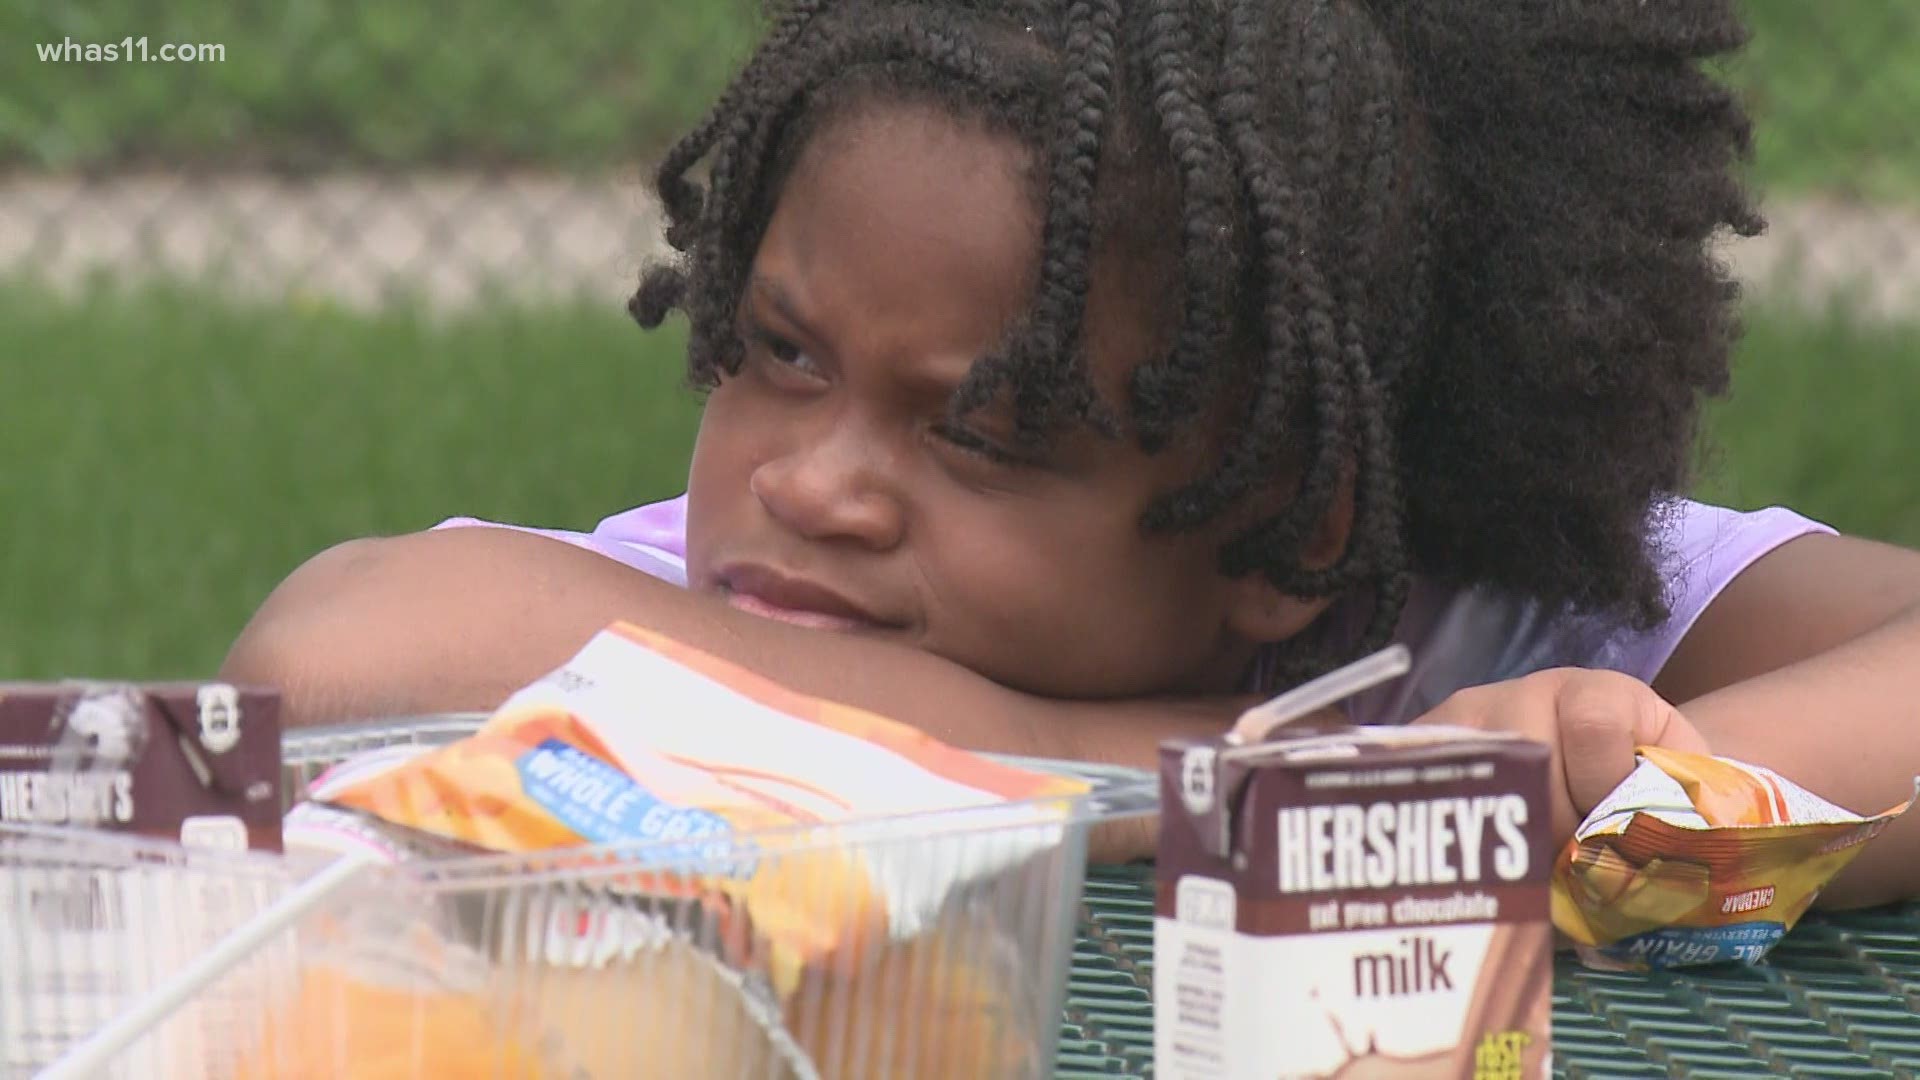 School may be out, but Jefferson County Public Schools is making sure that kids in Kentuckiana stay fed this summer.